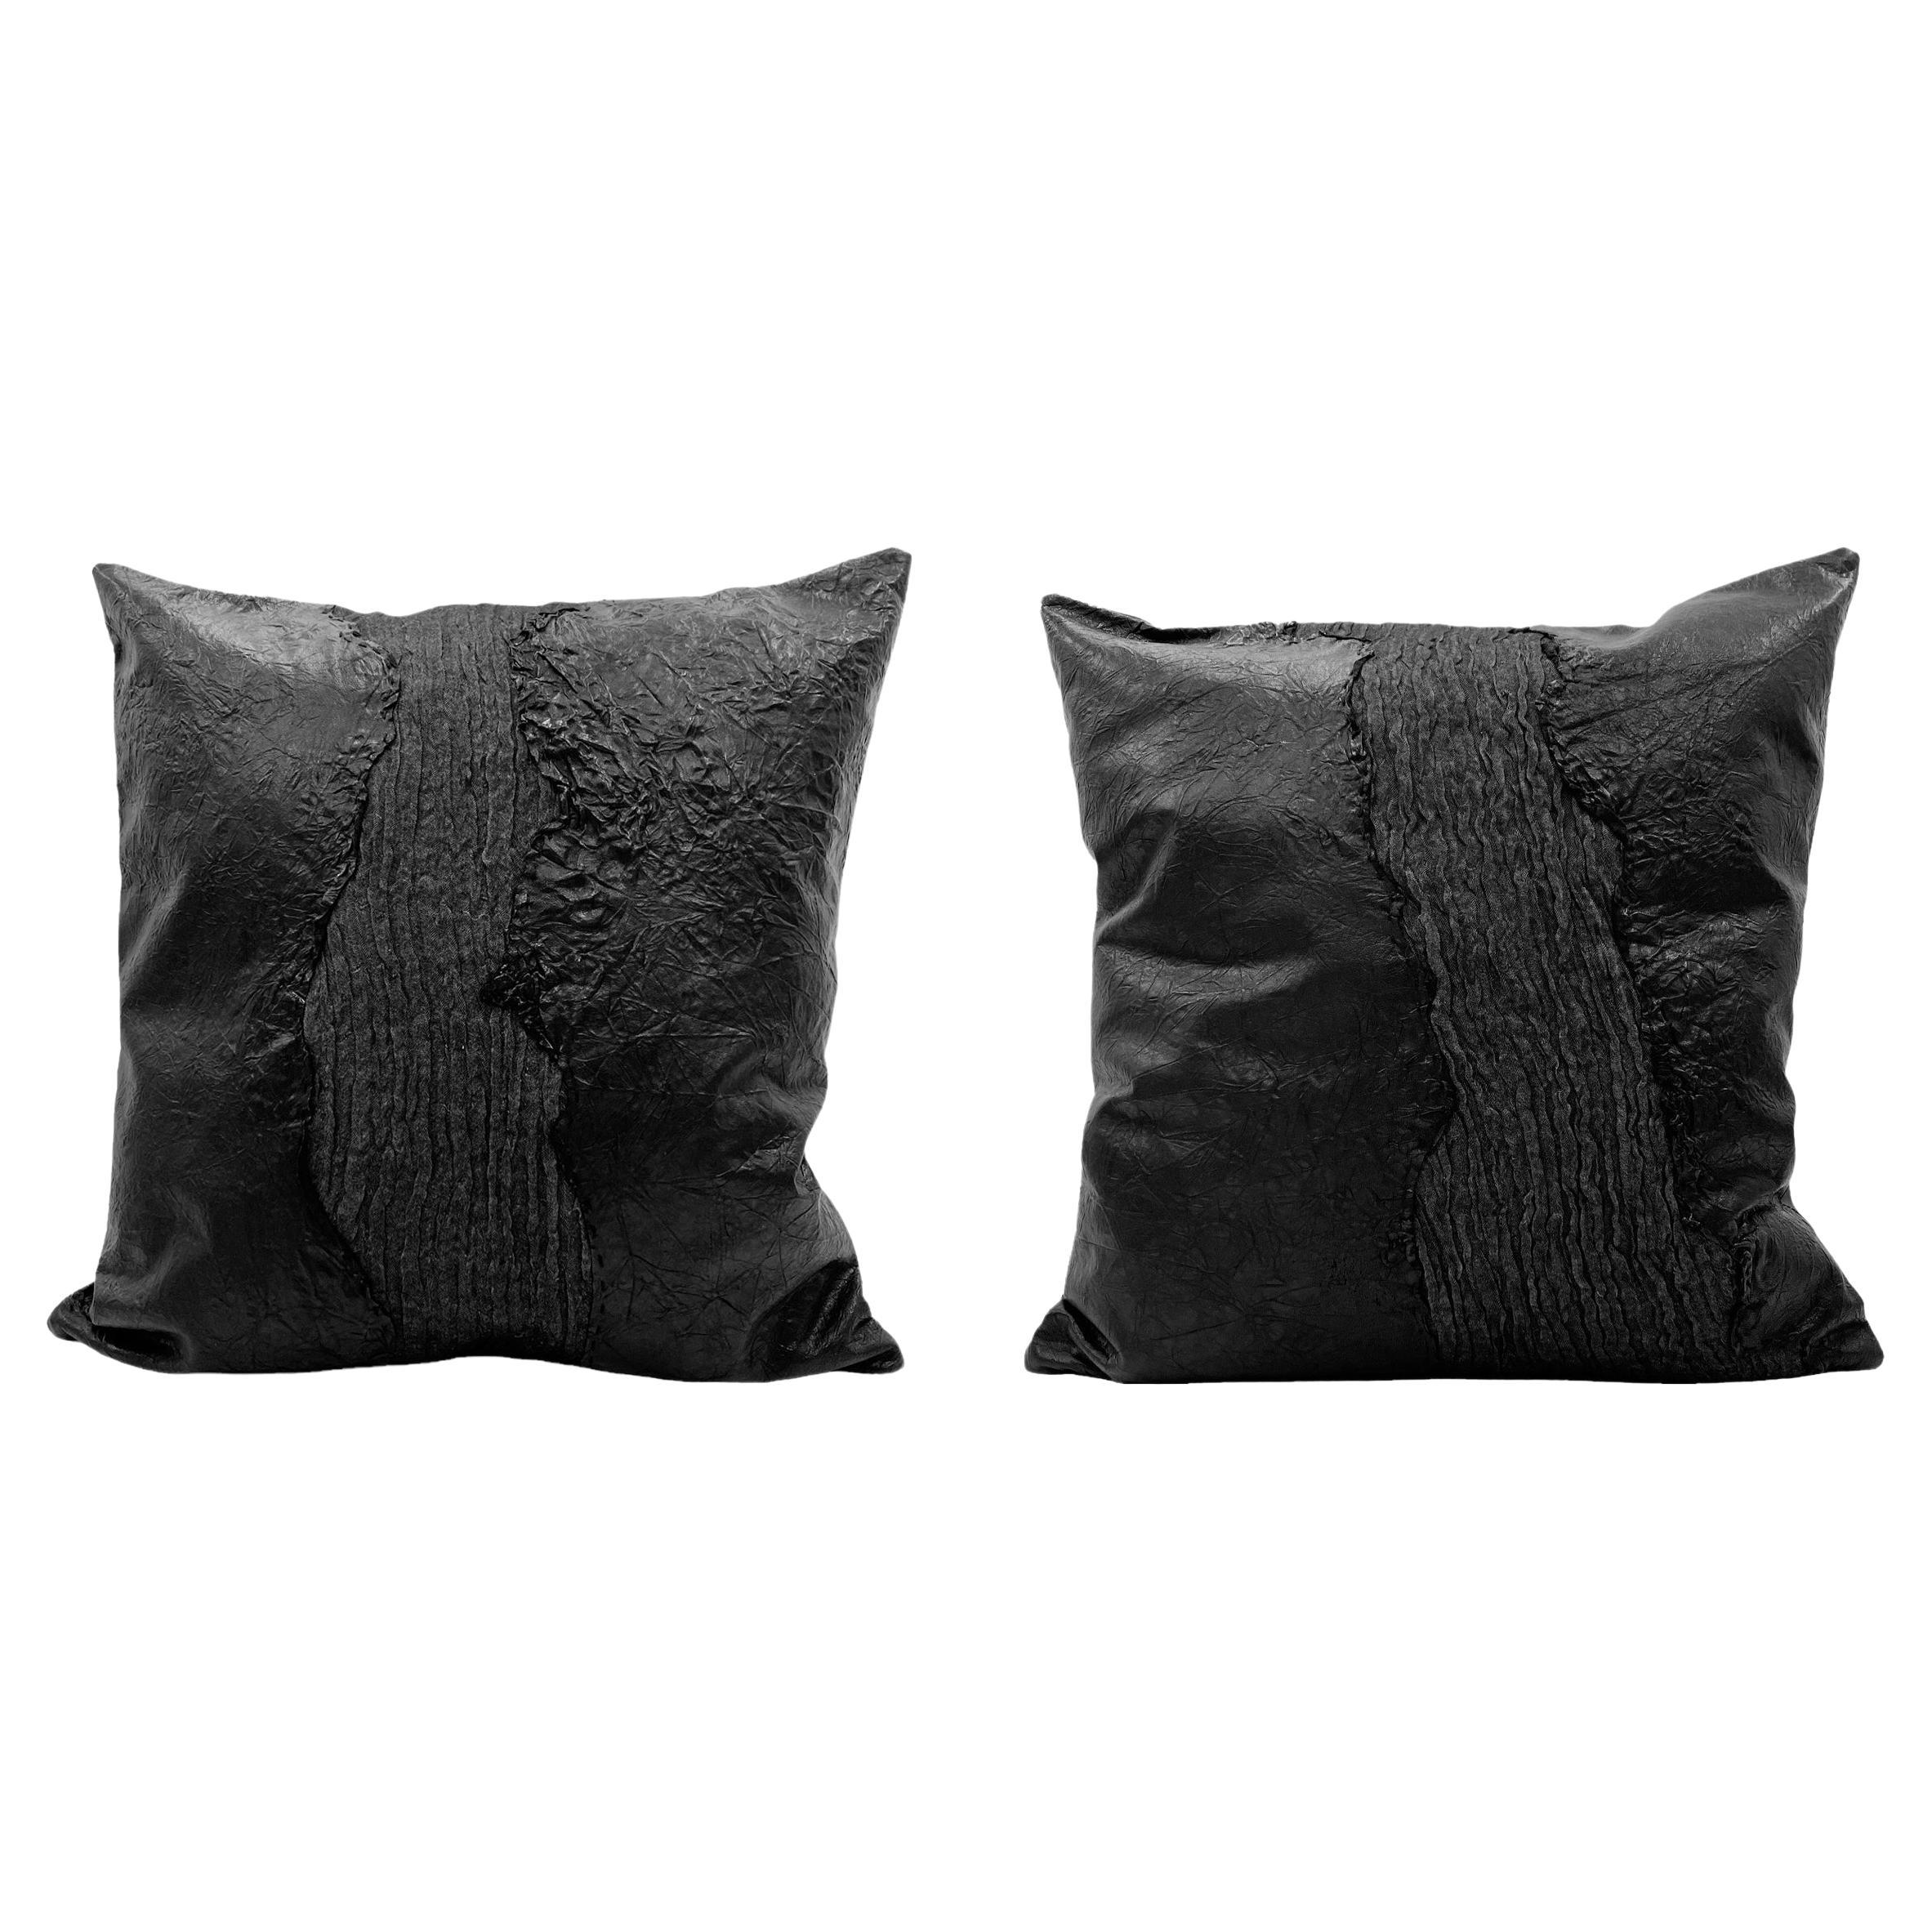 Genuine Wrinkled Black Leather Pillows For Sale